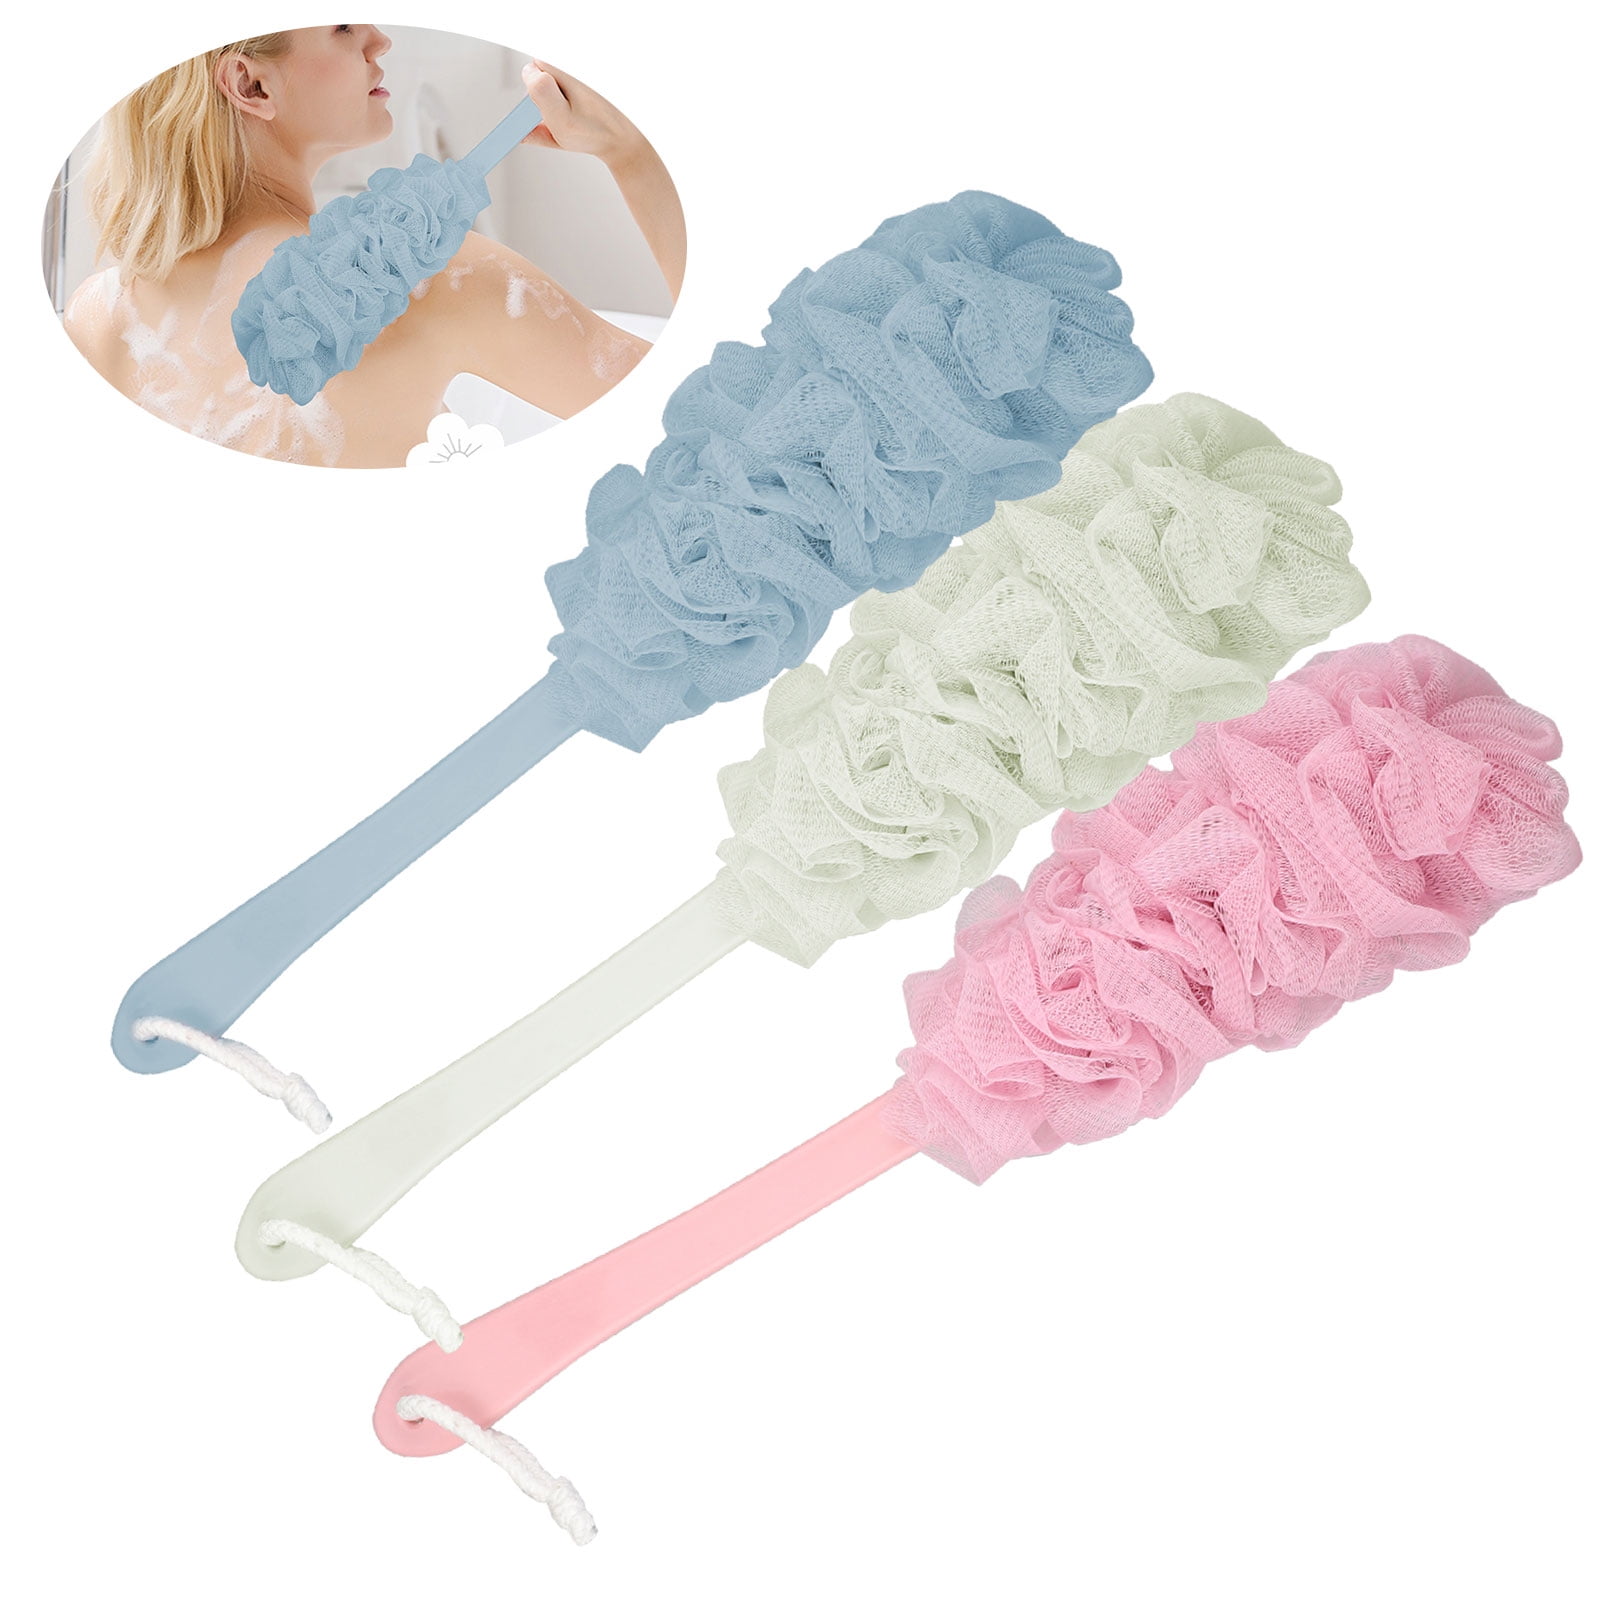 L-FENG-UK Plastic Long Handle Bath Body Back Scrubber Brush with Shower Mesh Pouf on Green